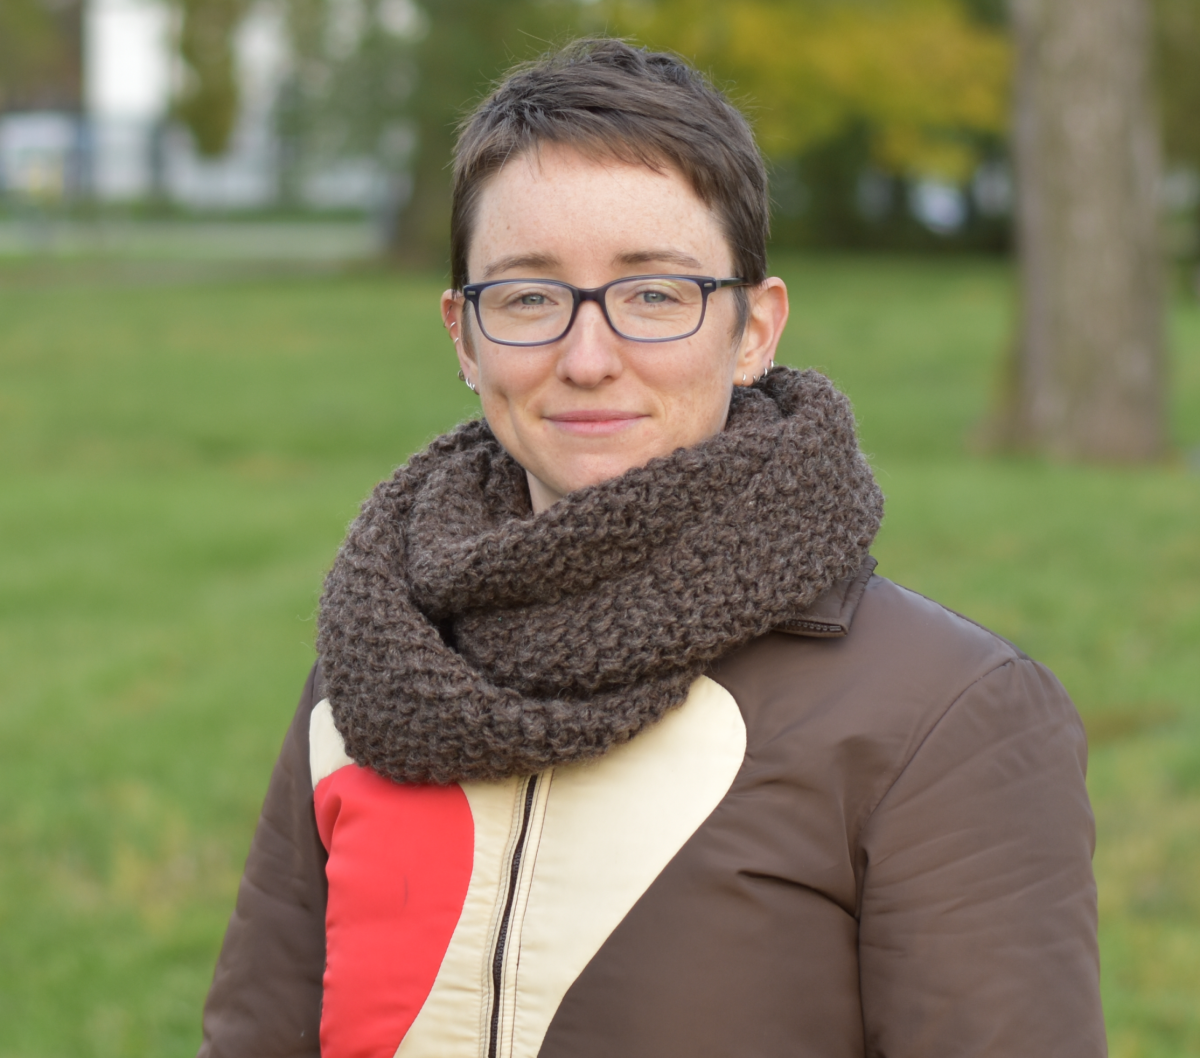 Woman with short dark brown hair, black glasses with a dark brown infinity scarf on, wearing a dark brown jacket with cream and red accents. She is standing outside in a park.